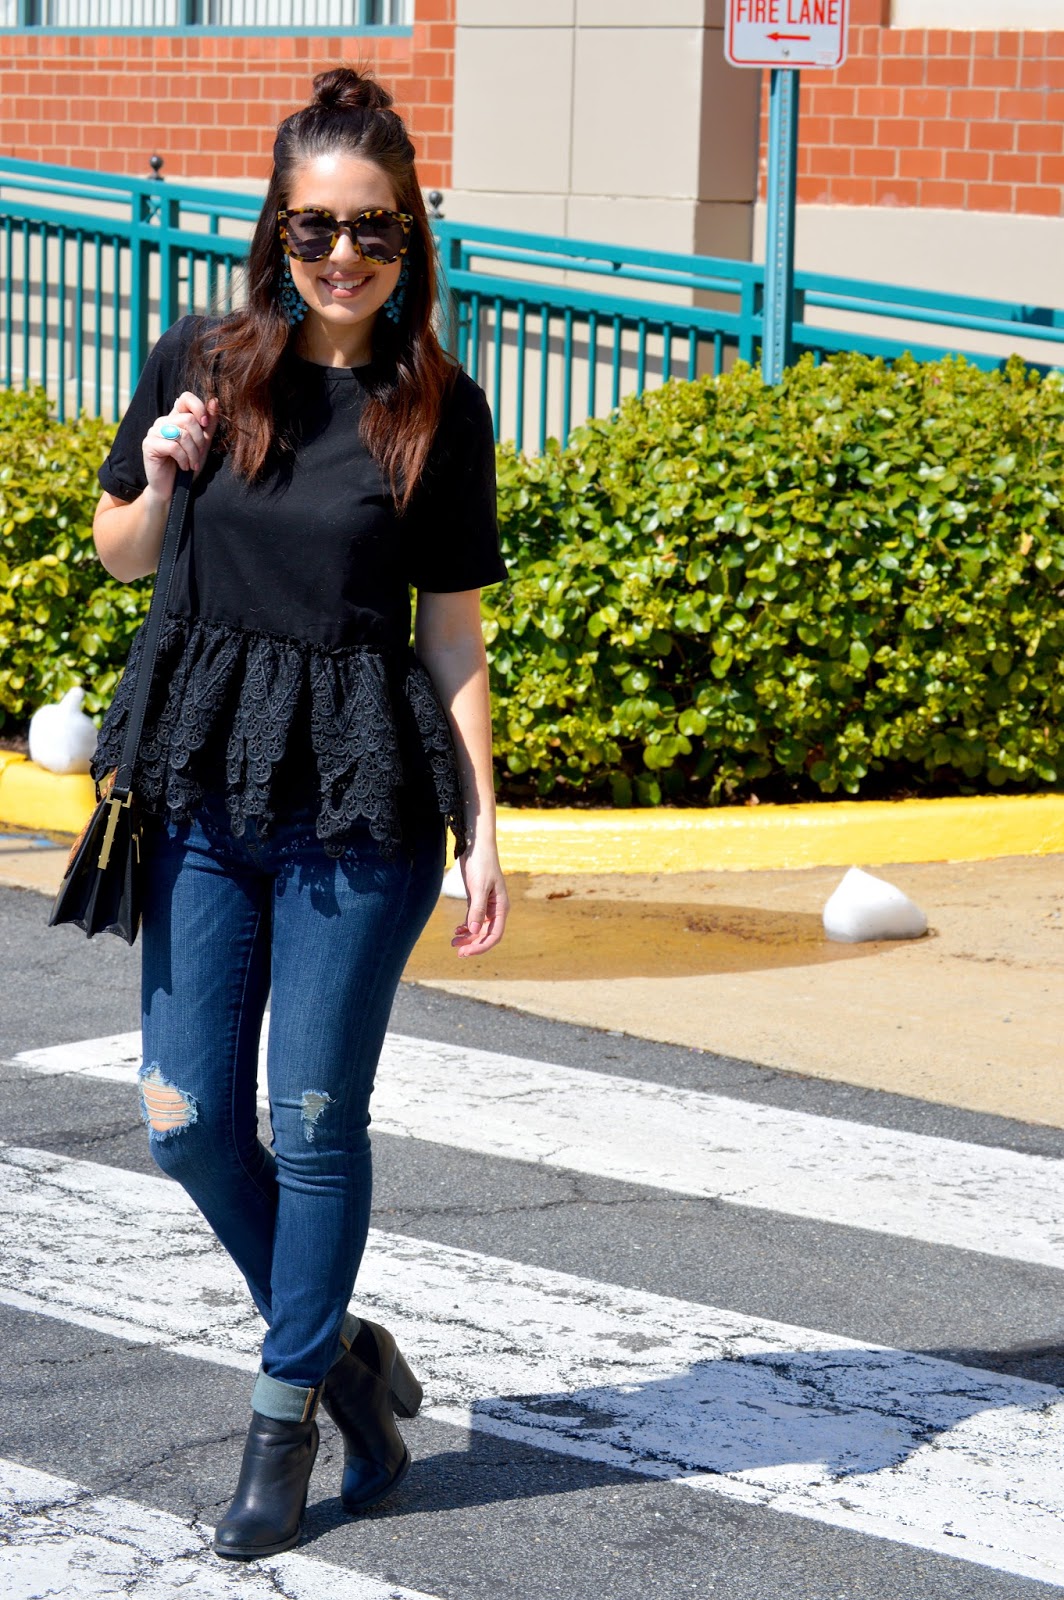 Rosy Outlook: The Cutest Black Peplum + Fashion Frenzy Link-Up!